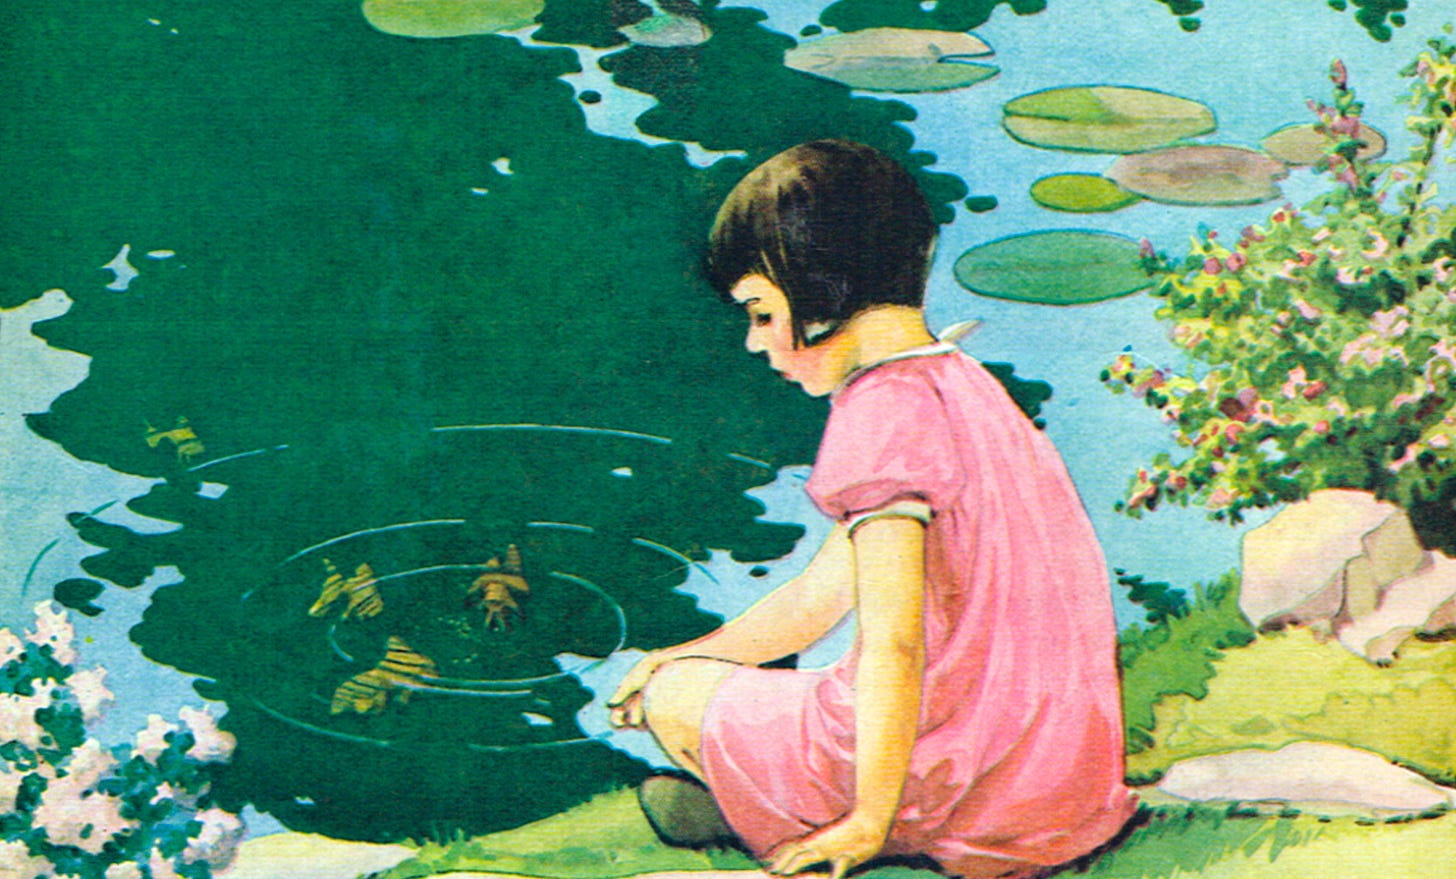 An illustration of a little girl sitting by a placid, calm pond. Original art by Miriam Story Hurford.